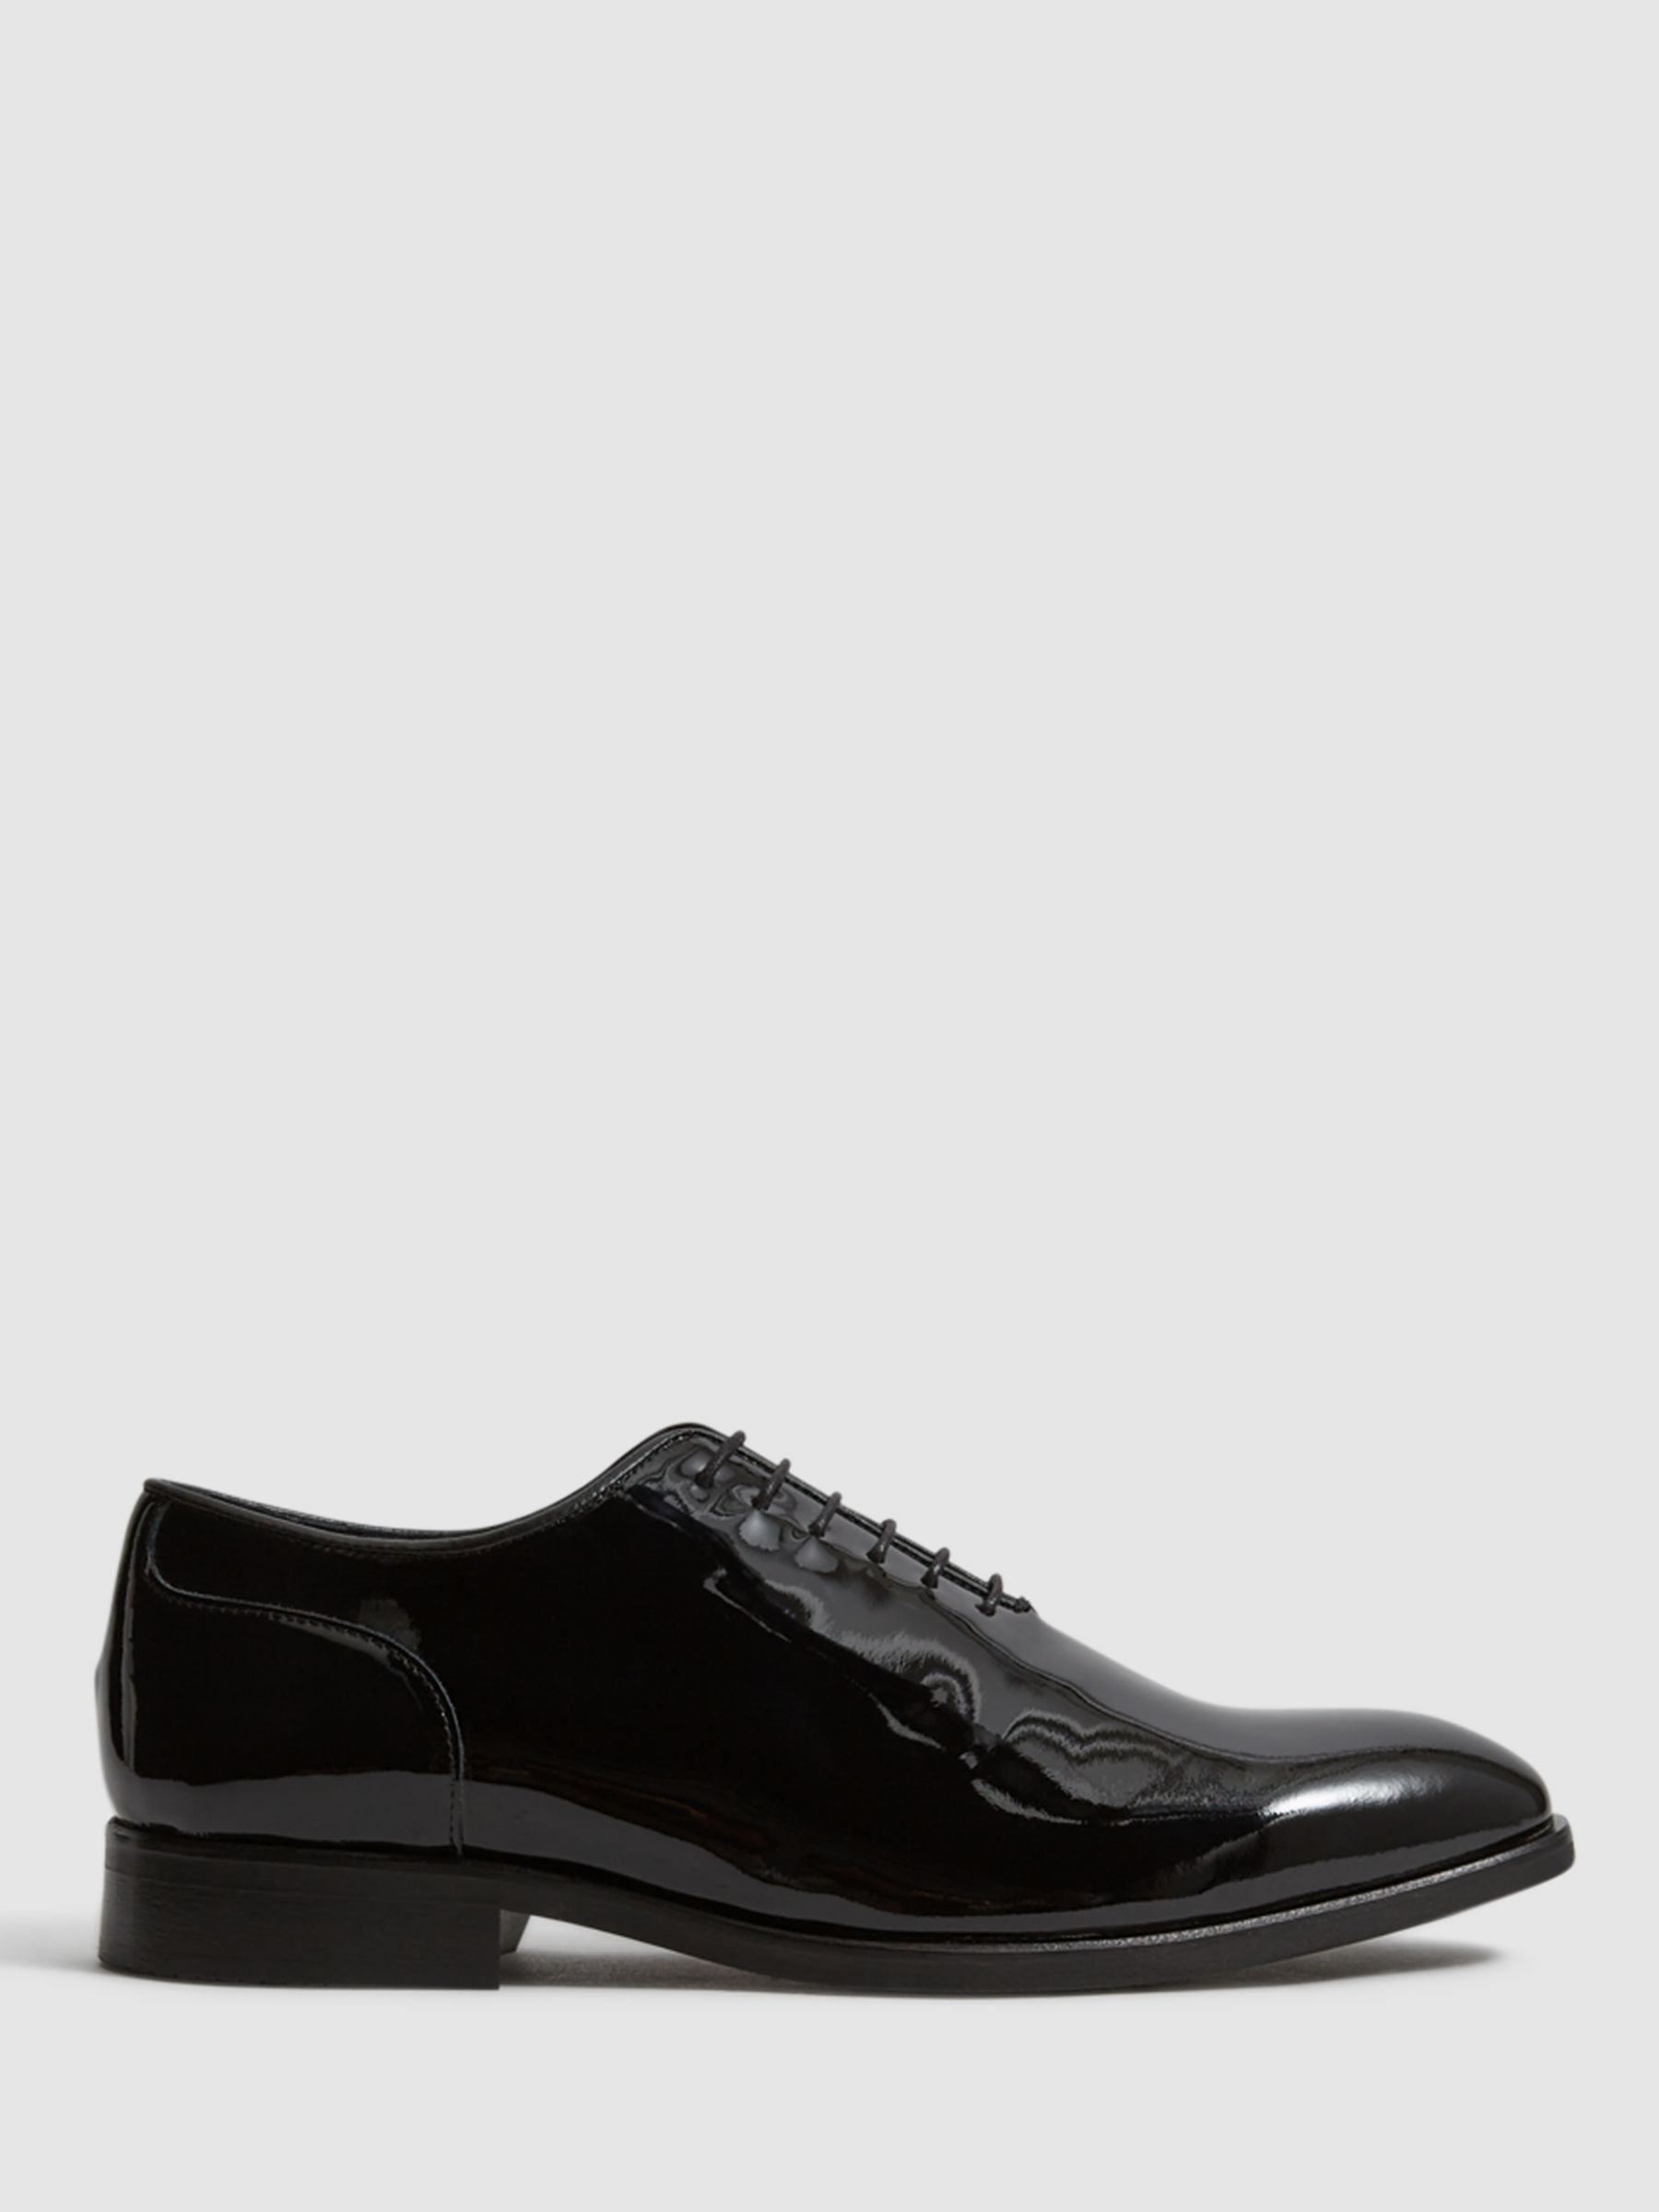 Reiss Bay Patent Leather Whole Cut Shoes, Black at John Lewis & Partners